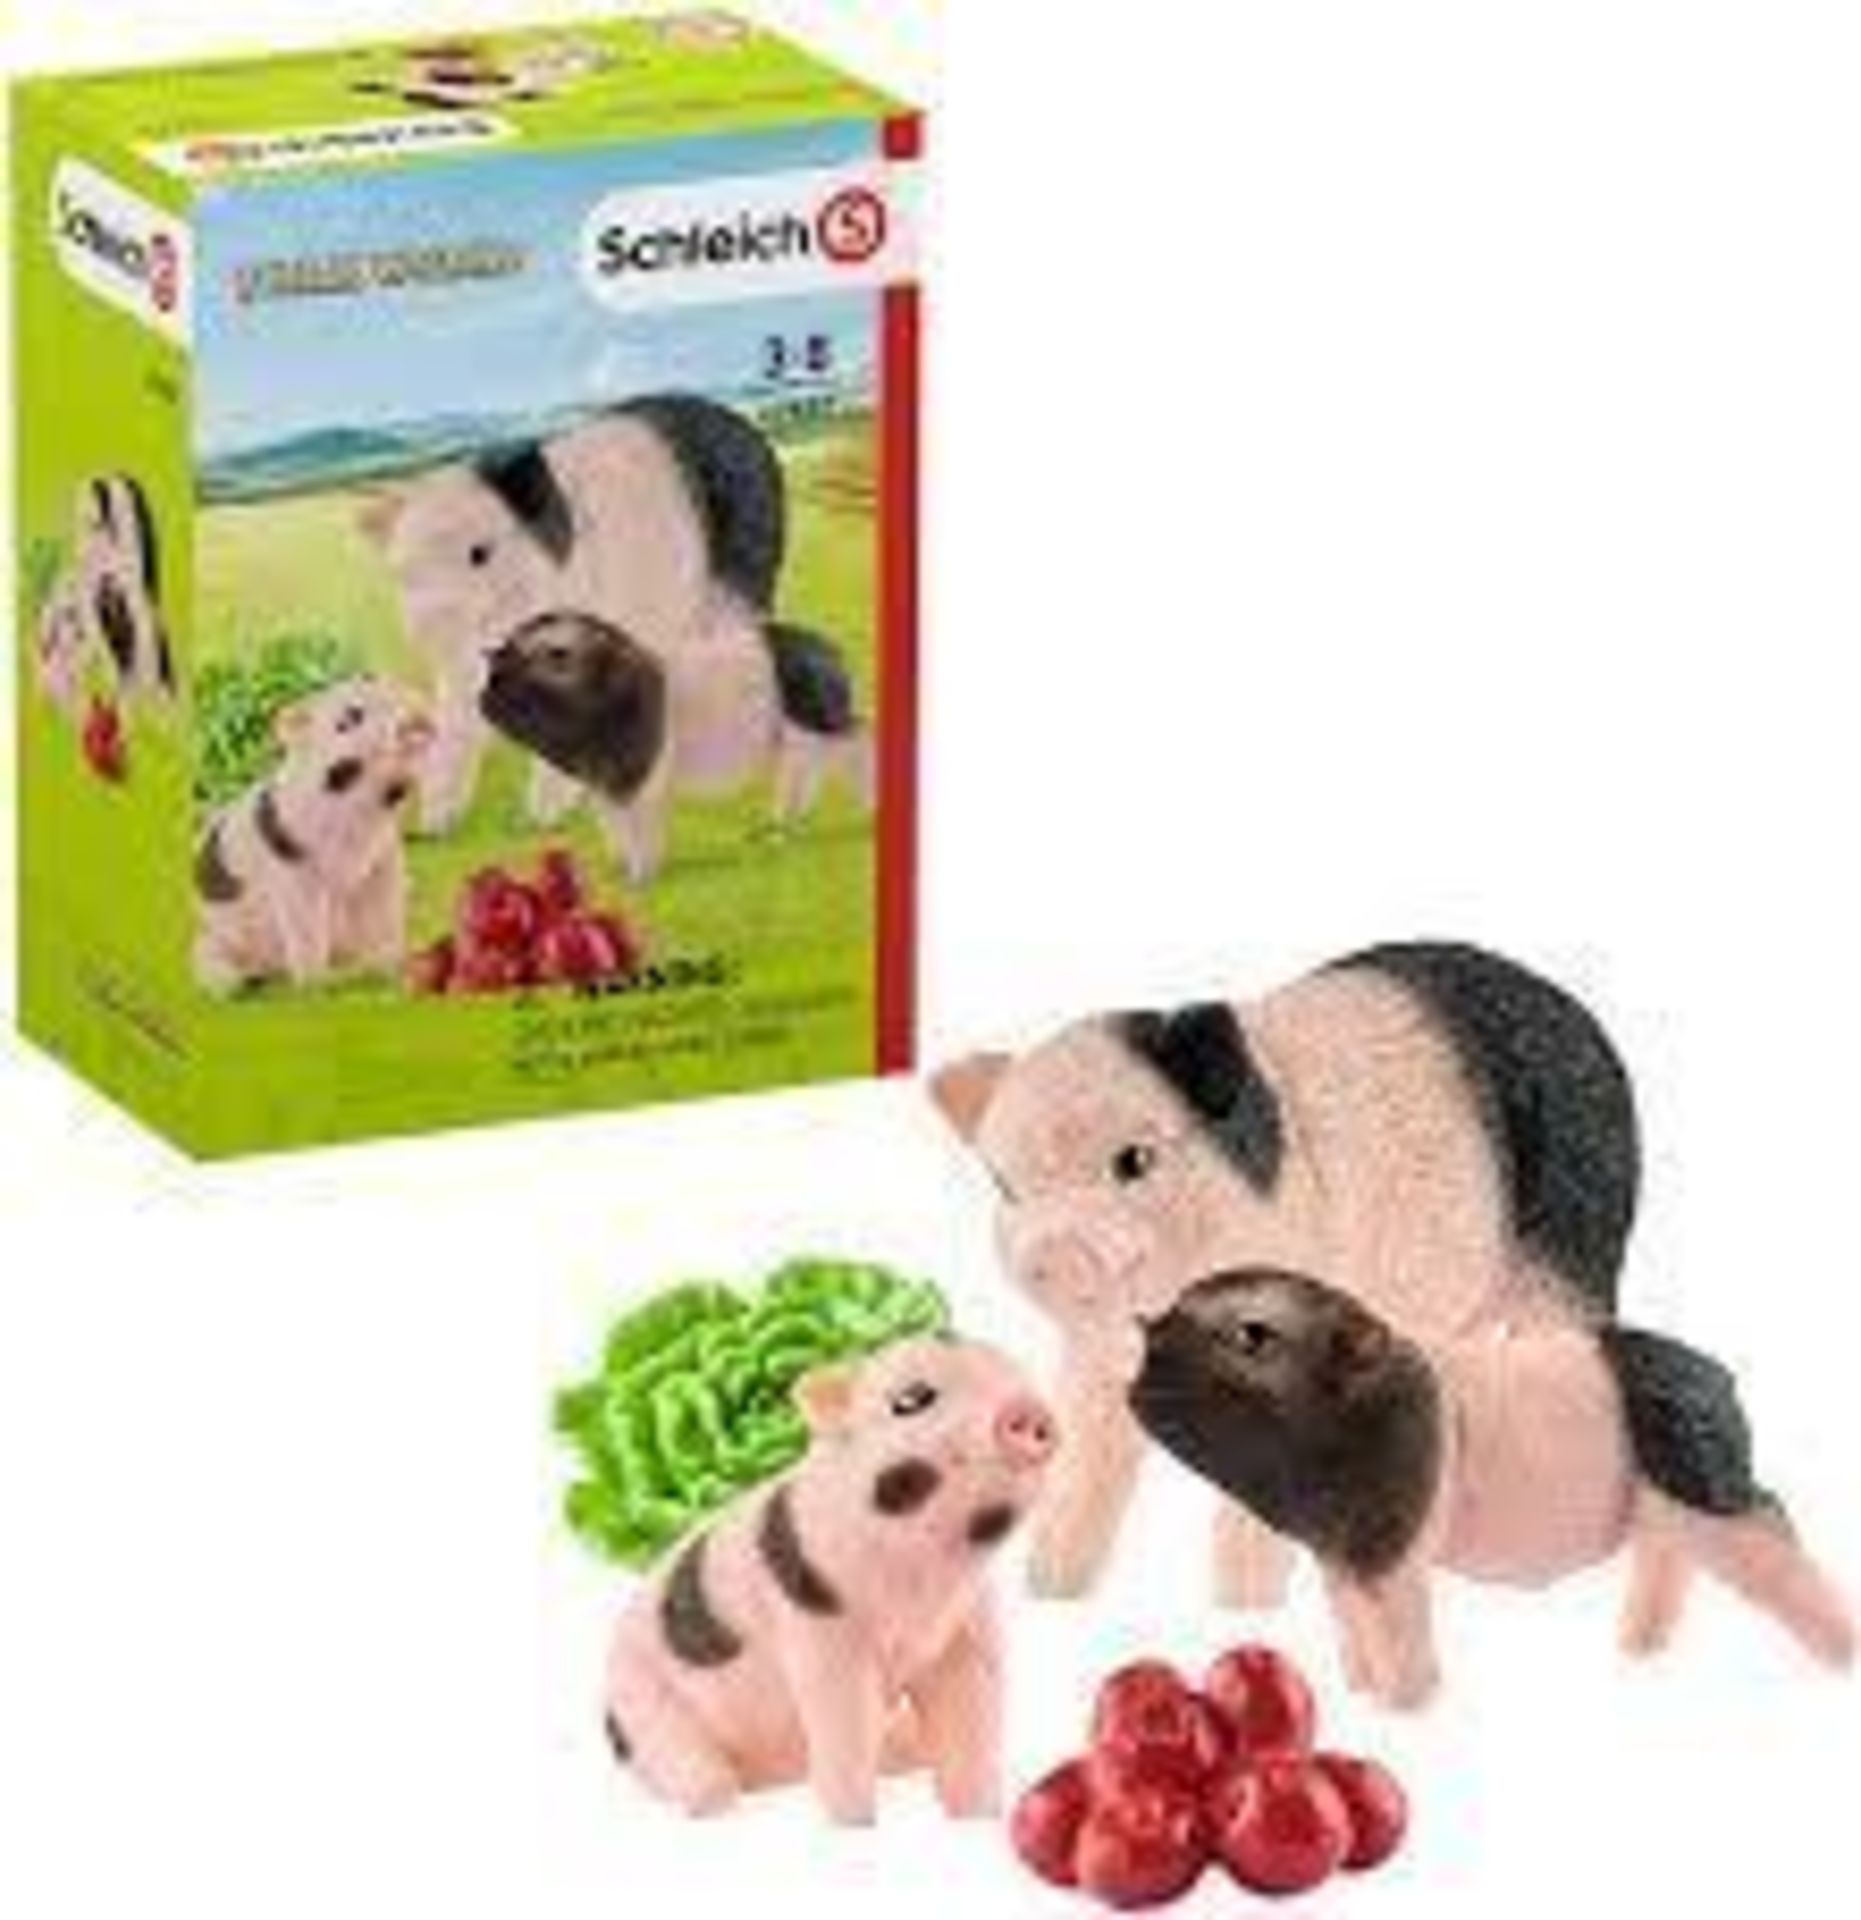 Schleich 42422 Miniature Pig Mother and Piglets £7.49 RRP